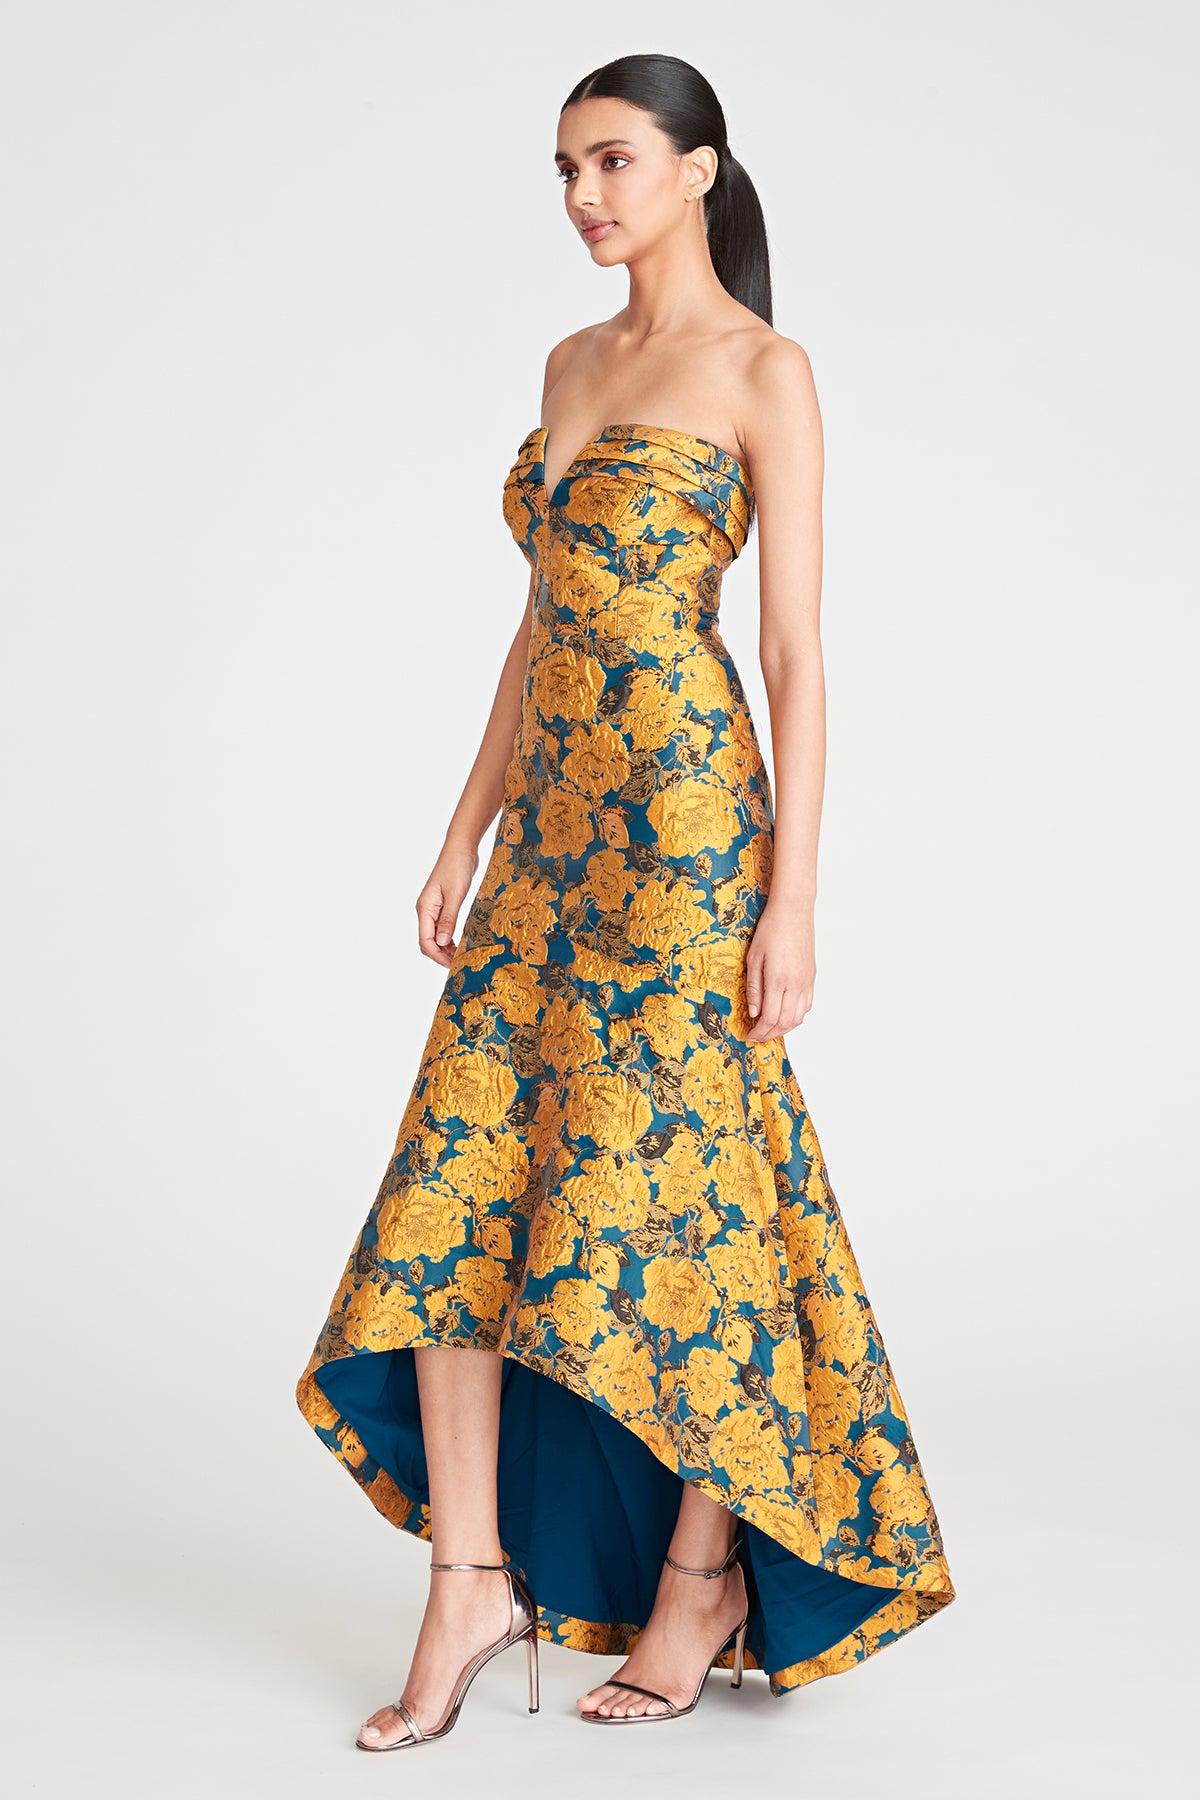 Octavia Fit And Flare Gown